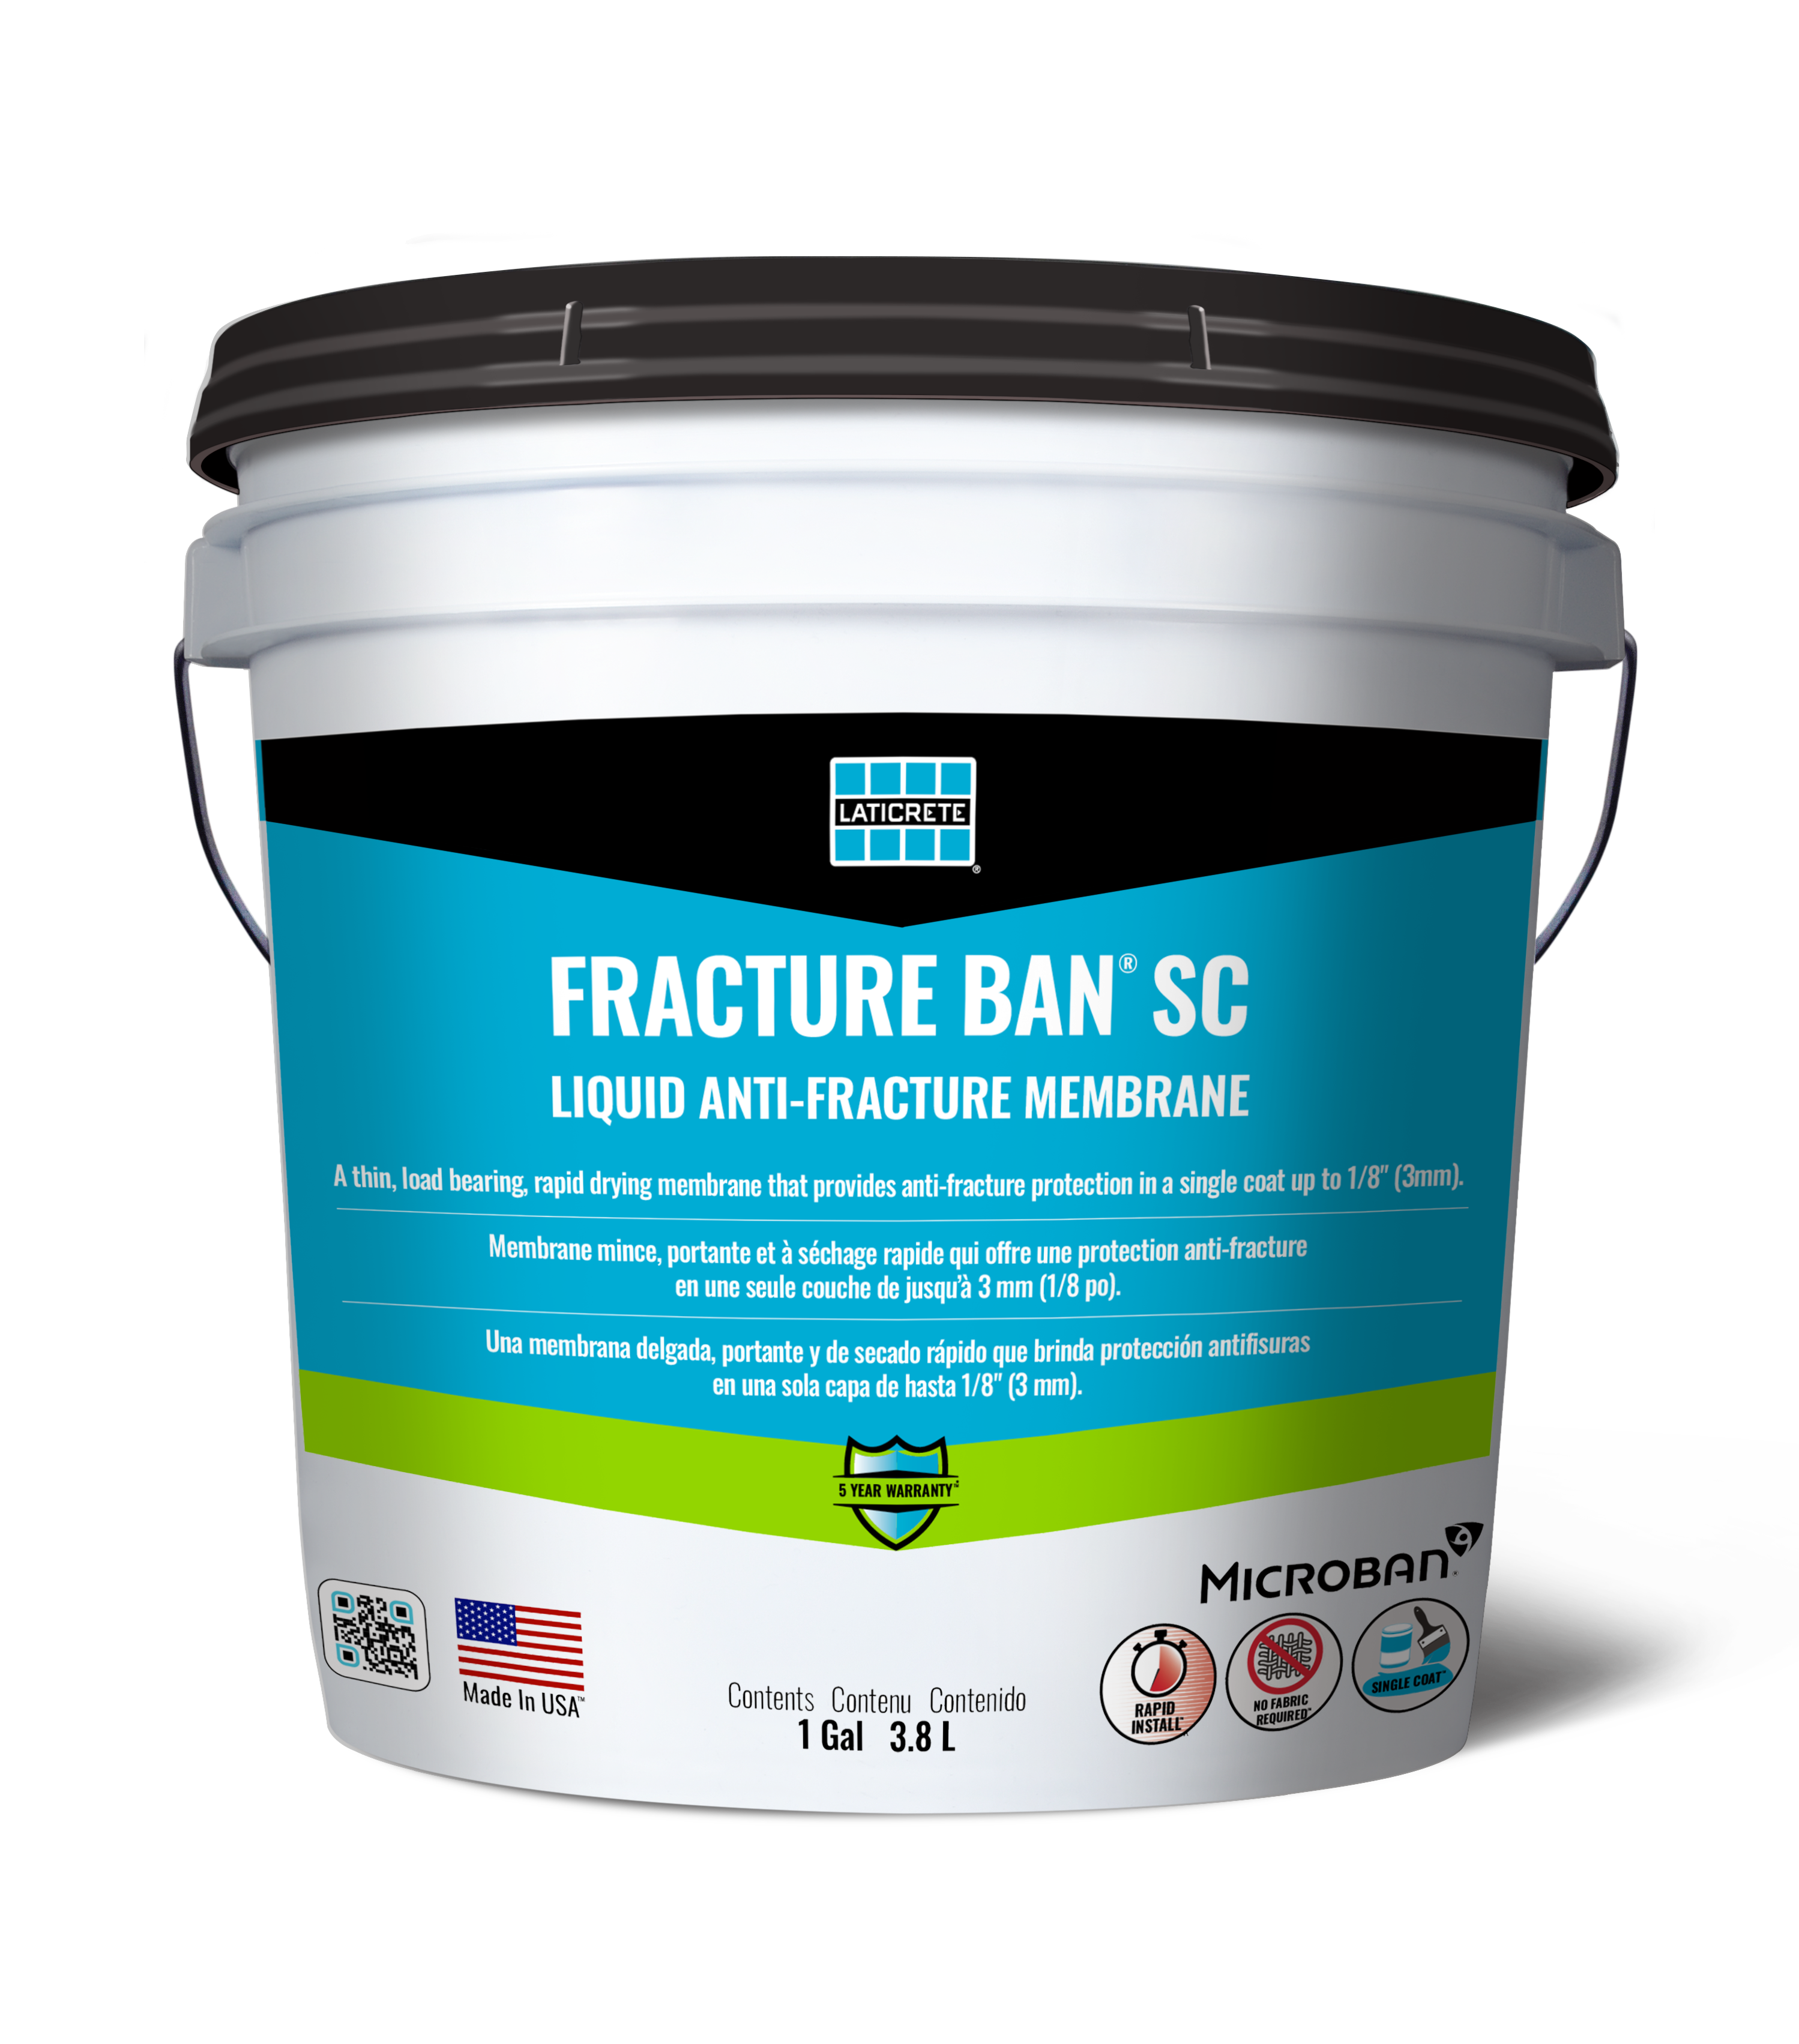 FRACTURE BAN® SC